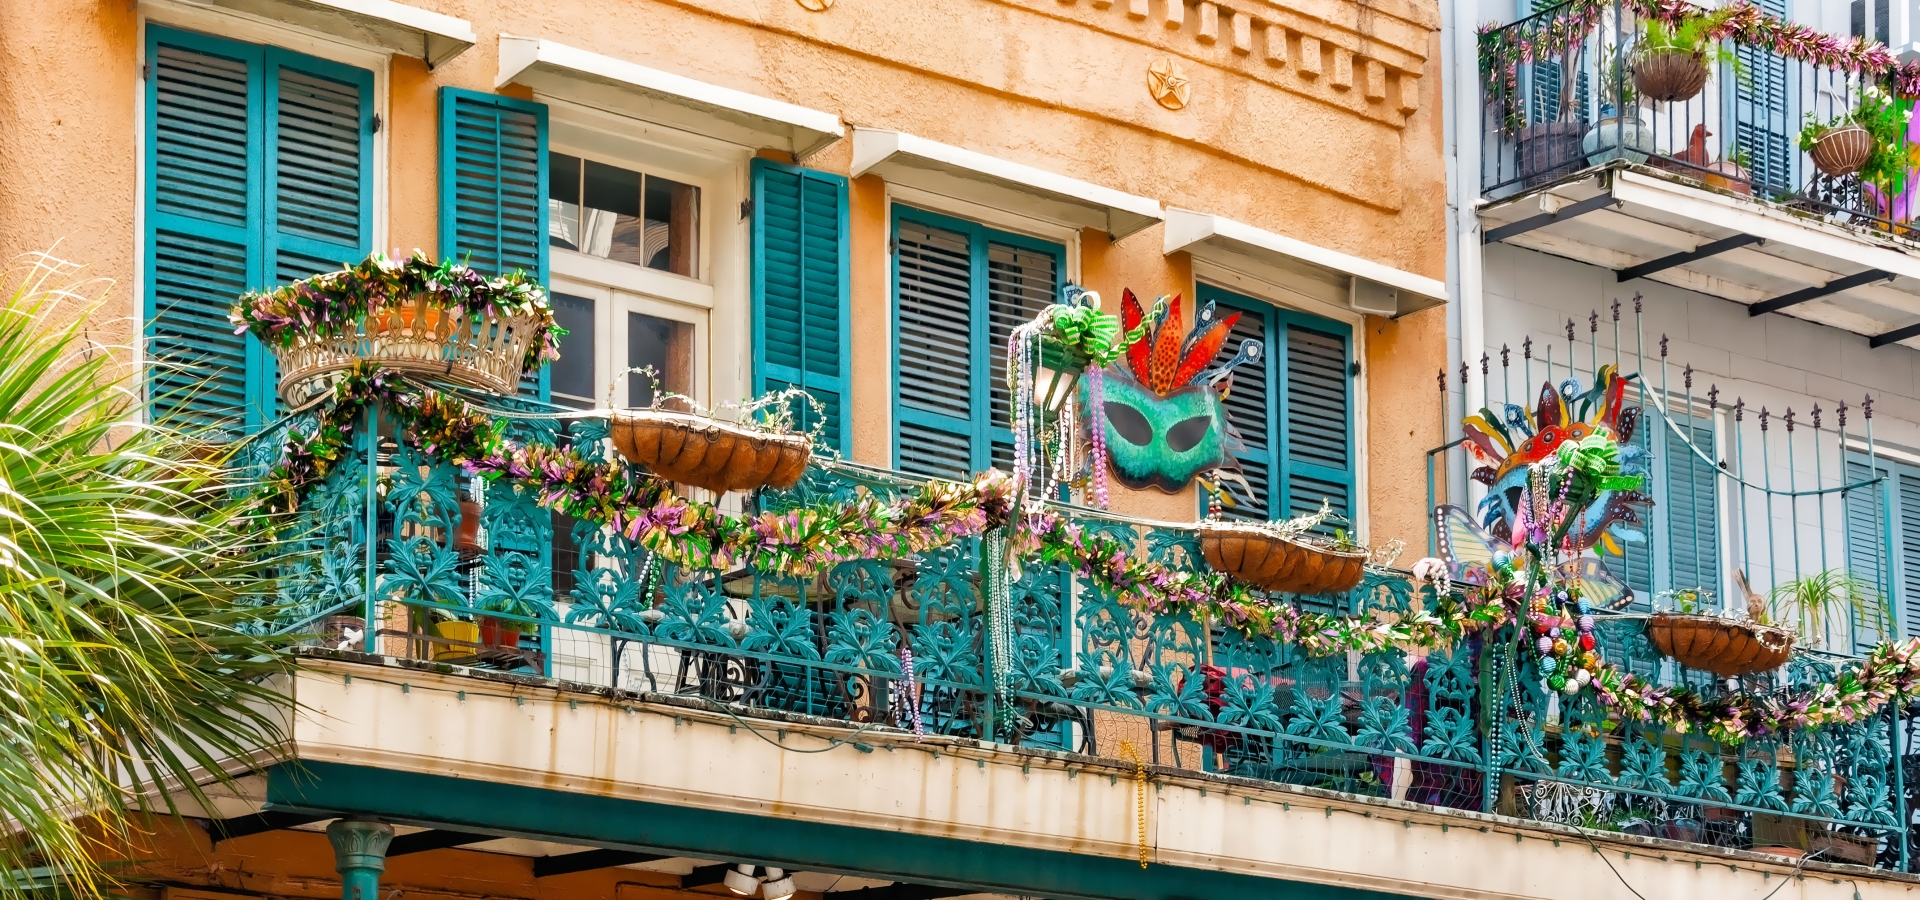 Mardi Gras Decorated Balconies. Masks, beads, garlands with Mardi Gras colors adorn these New Orleans balconies in the French Quarter.